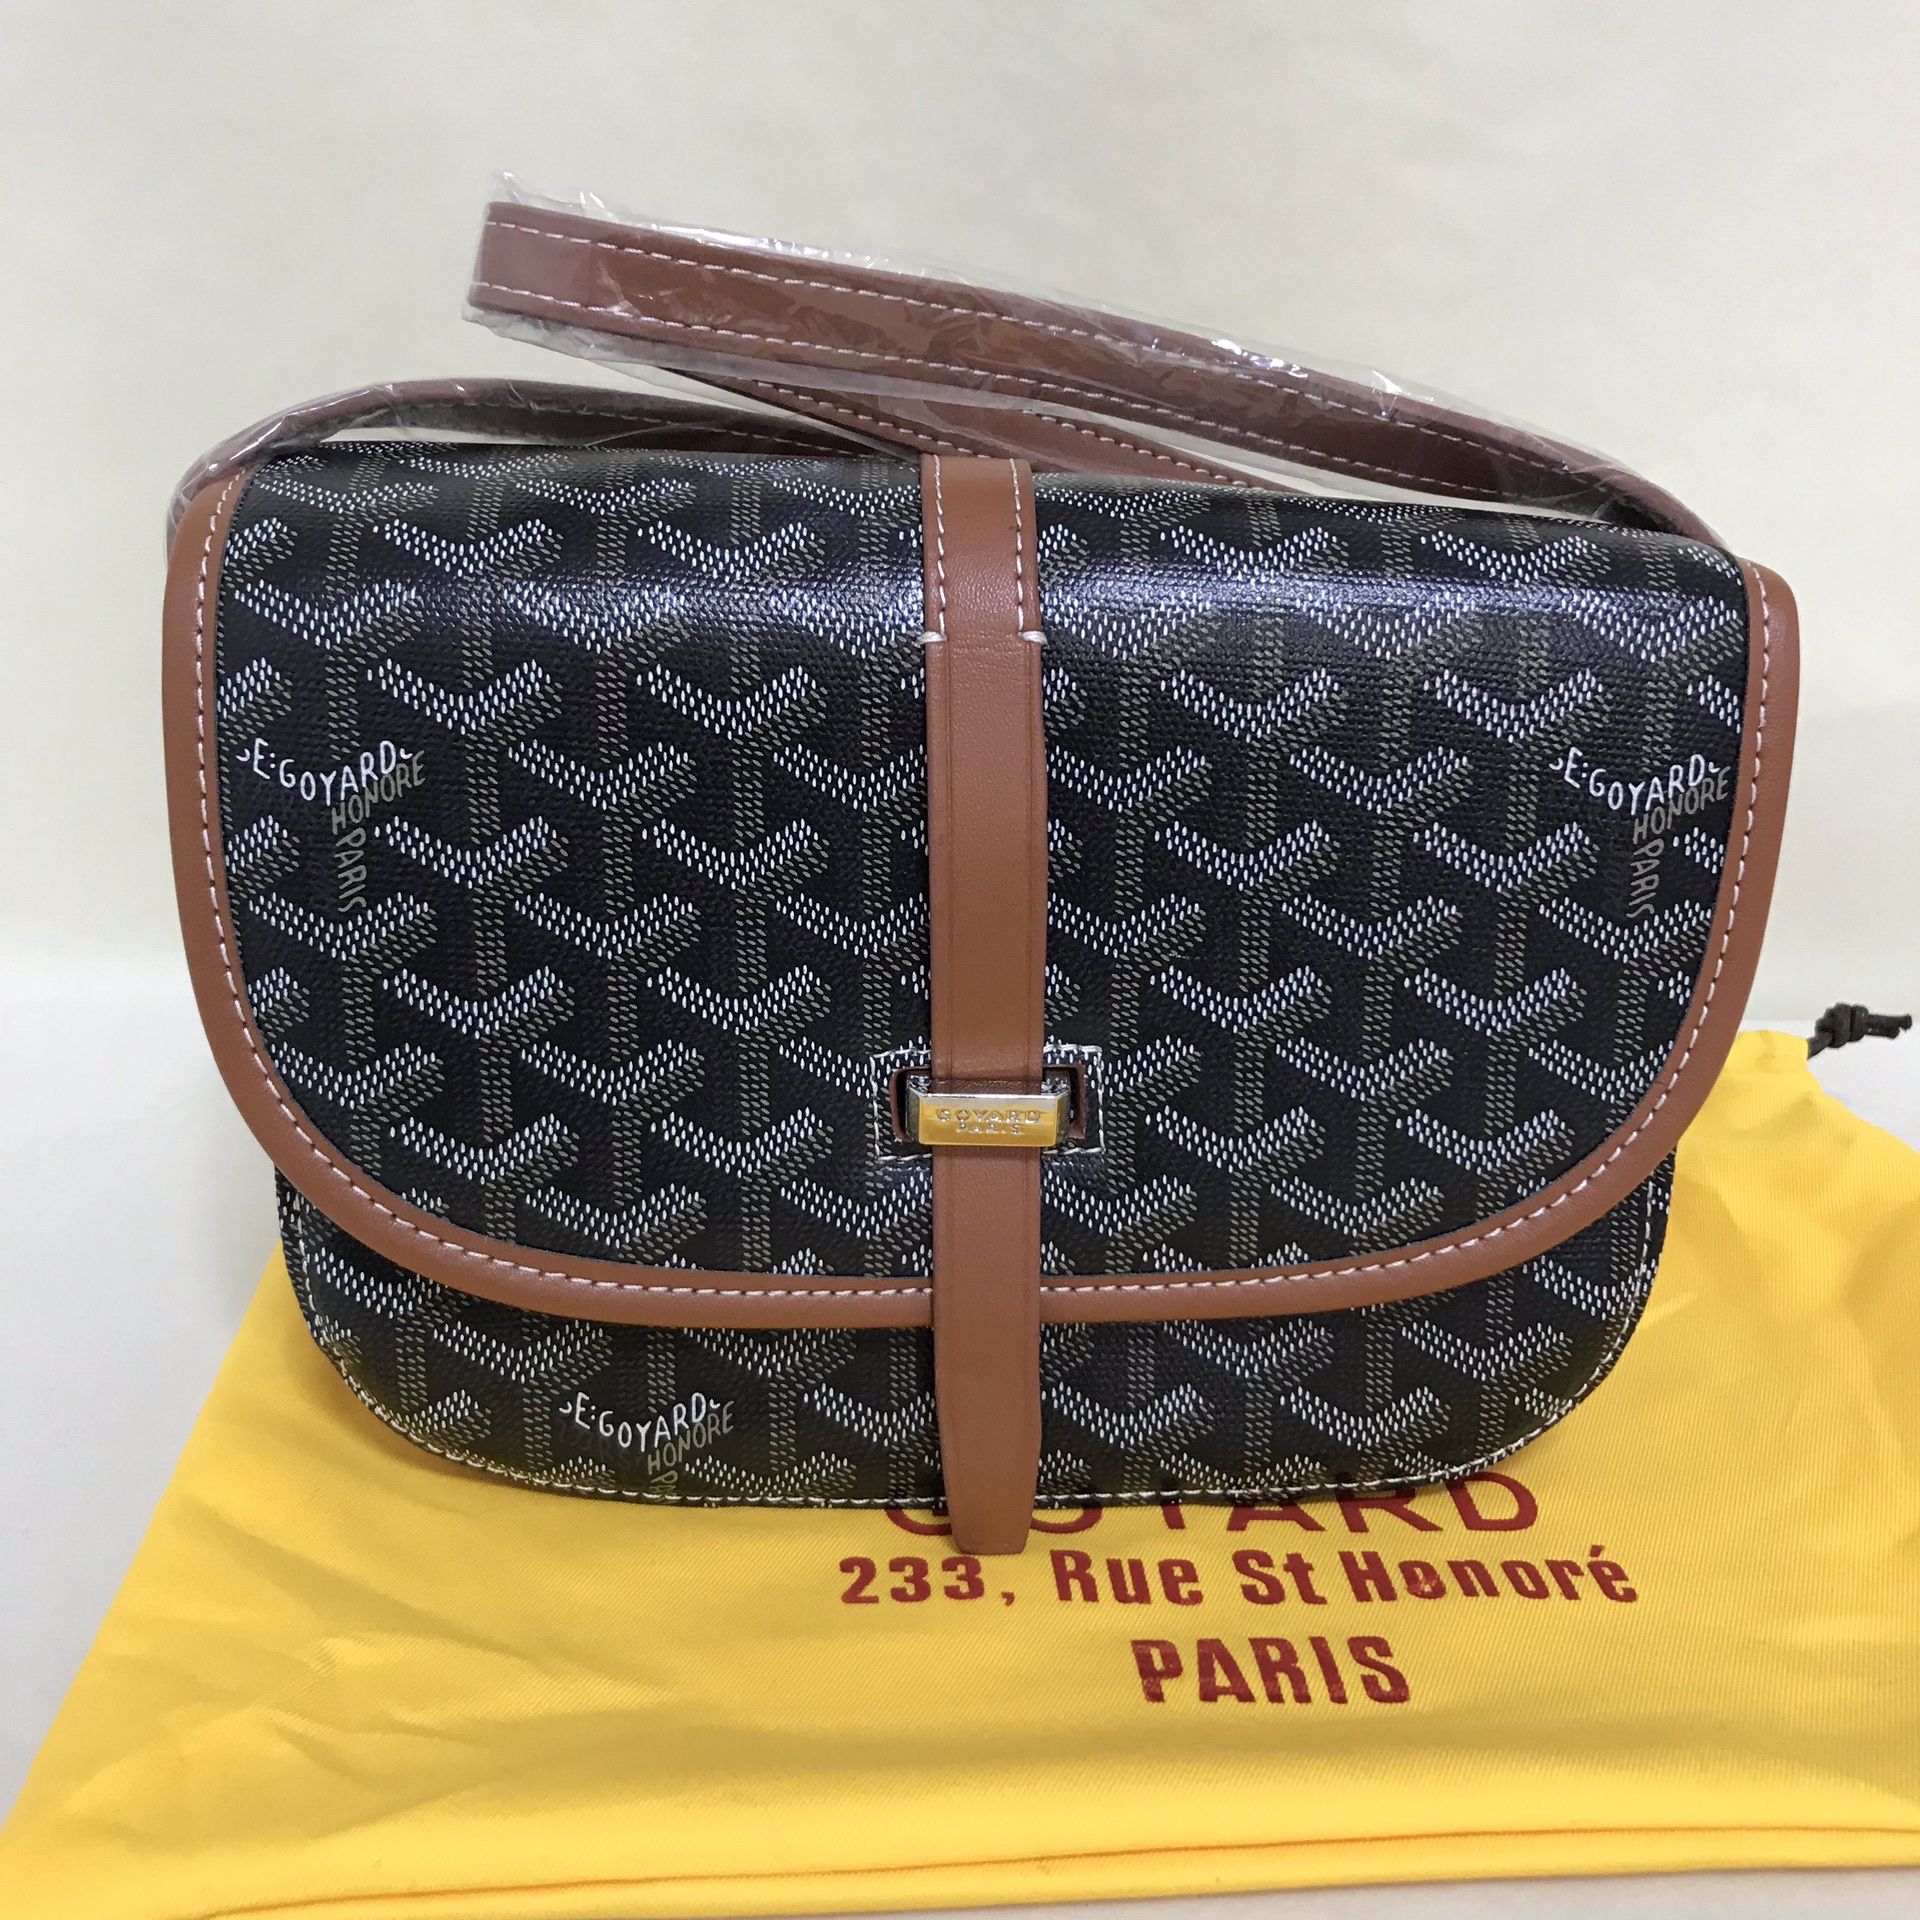 Goyard Saint Louis Tote PM Yellow in Canvas/Calfskin with